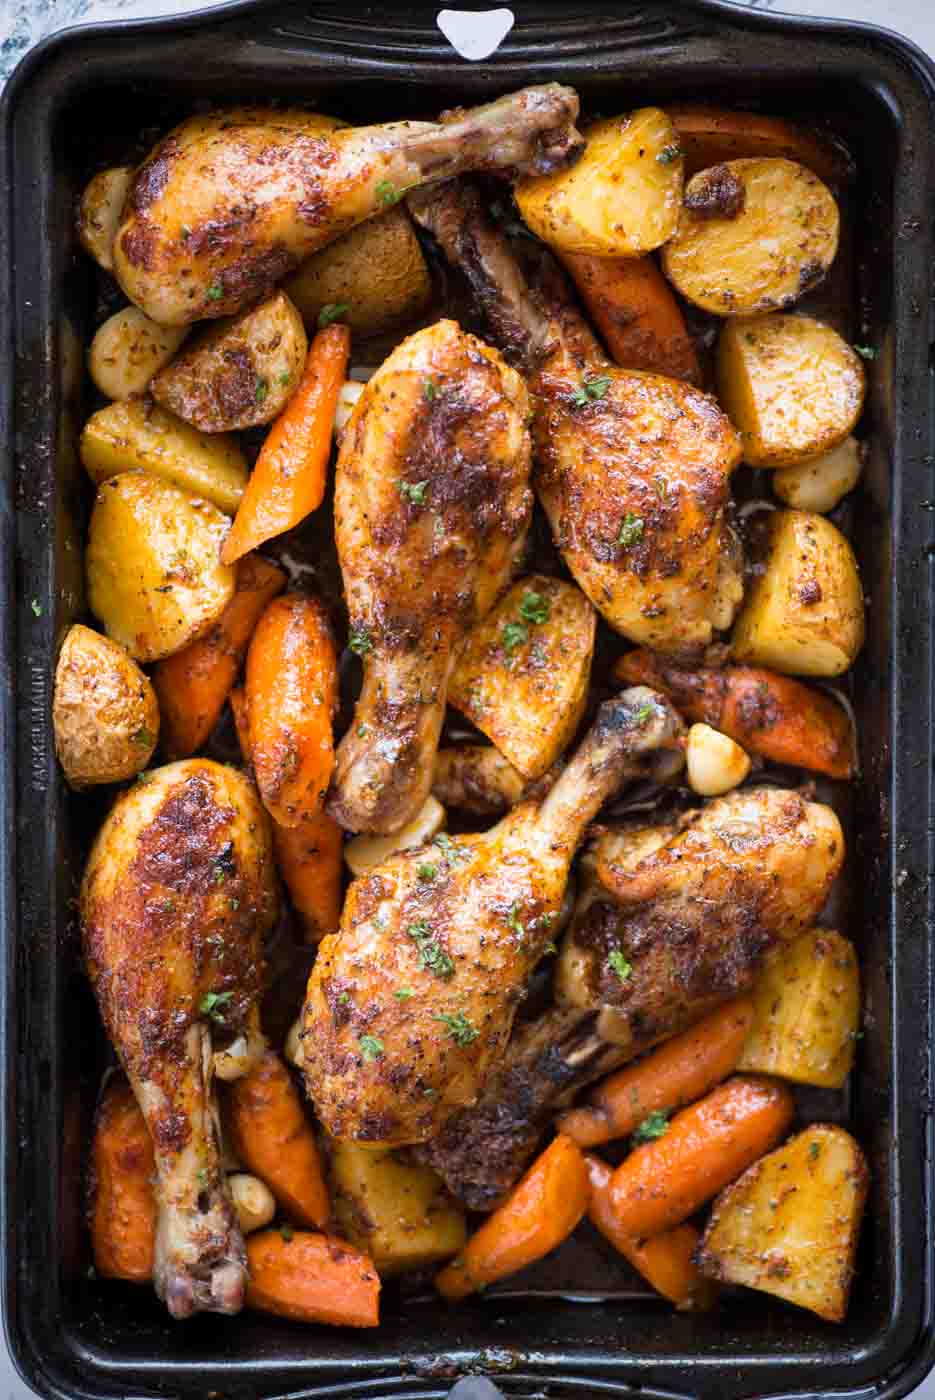 How To Bake Chicken Drumsticks In An Electric Skillet? | Storables